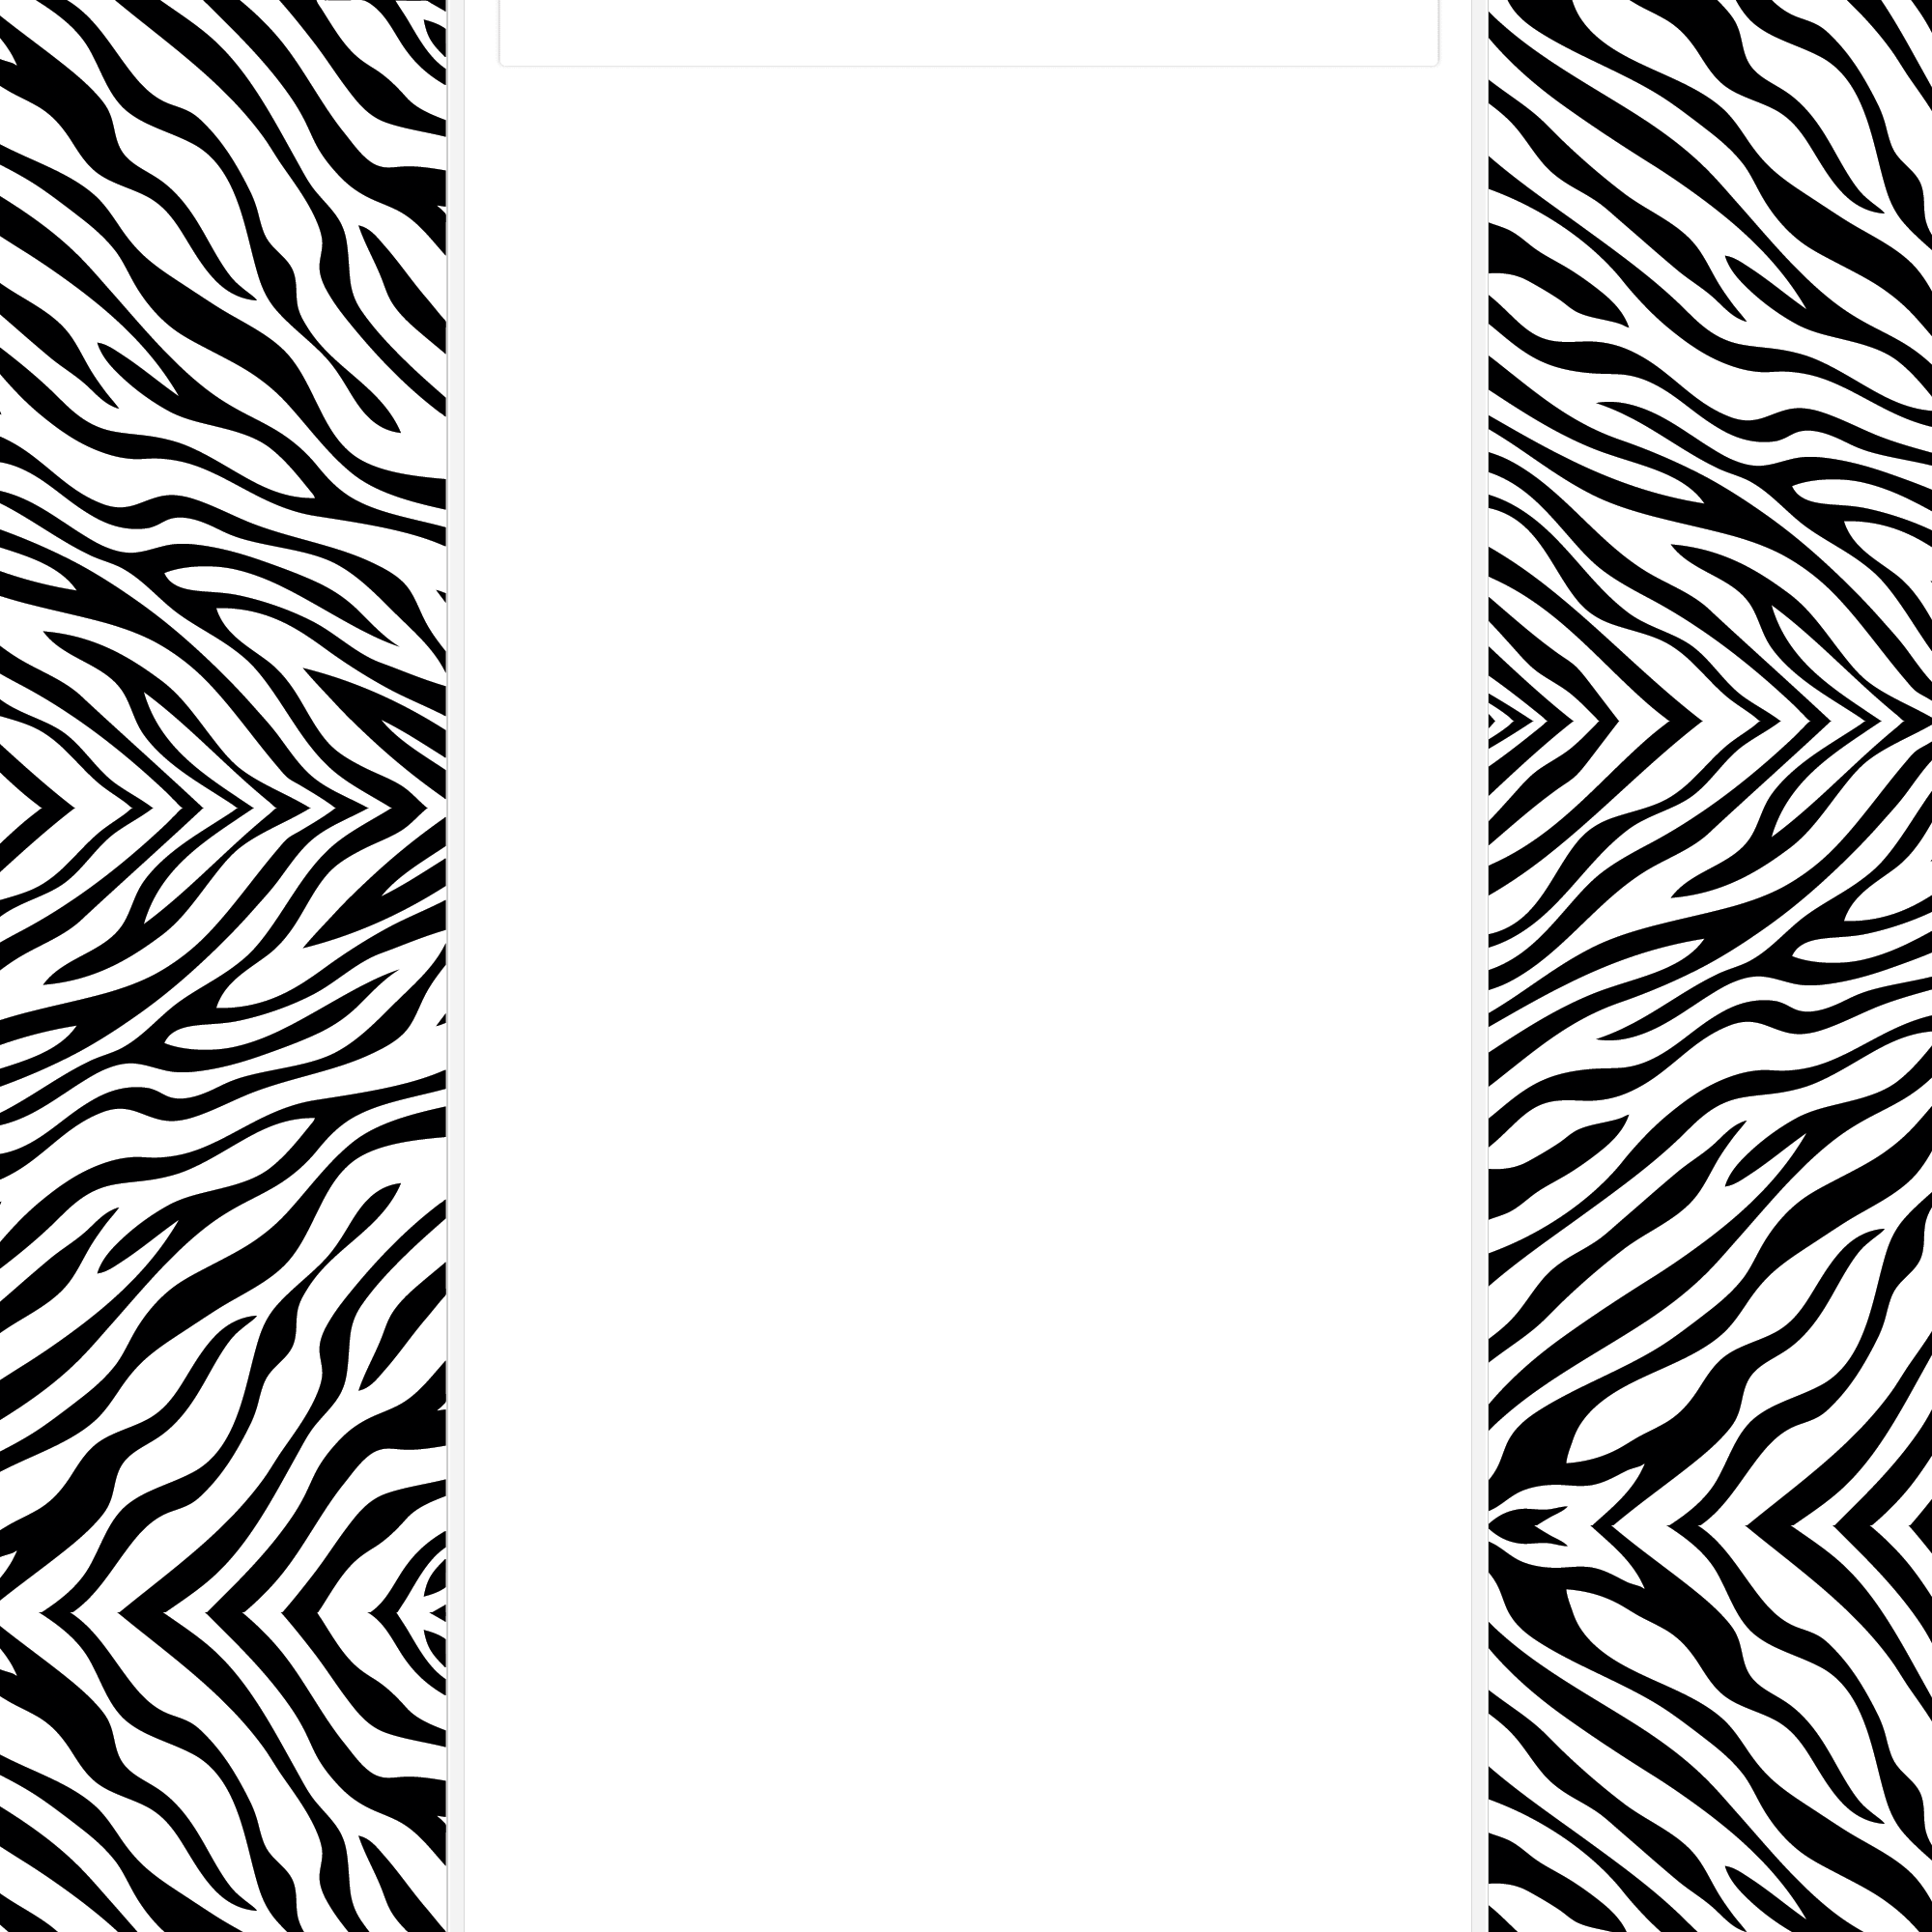 18 Zebra Print Border Clip Art Free Cliparts That You Can Download To